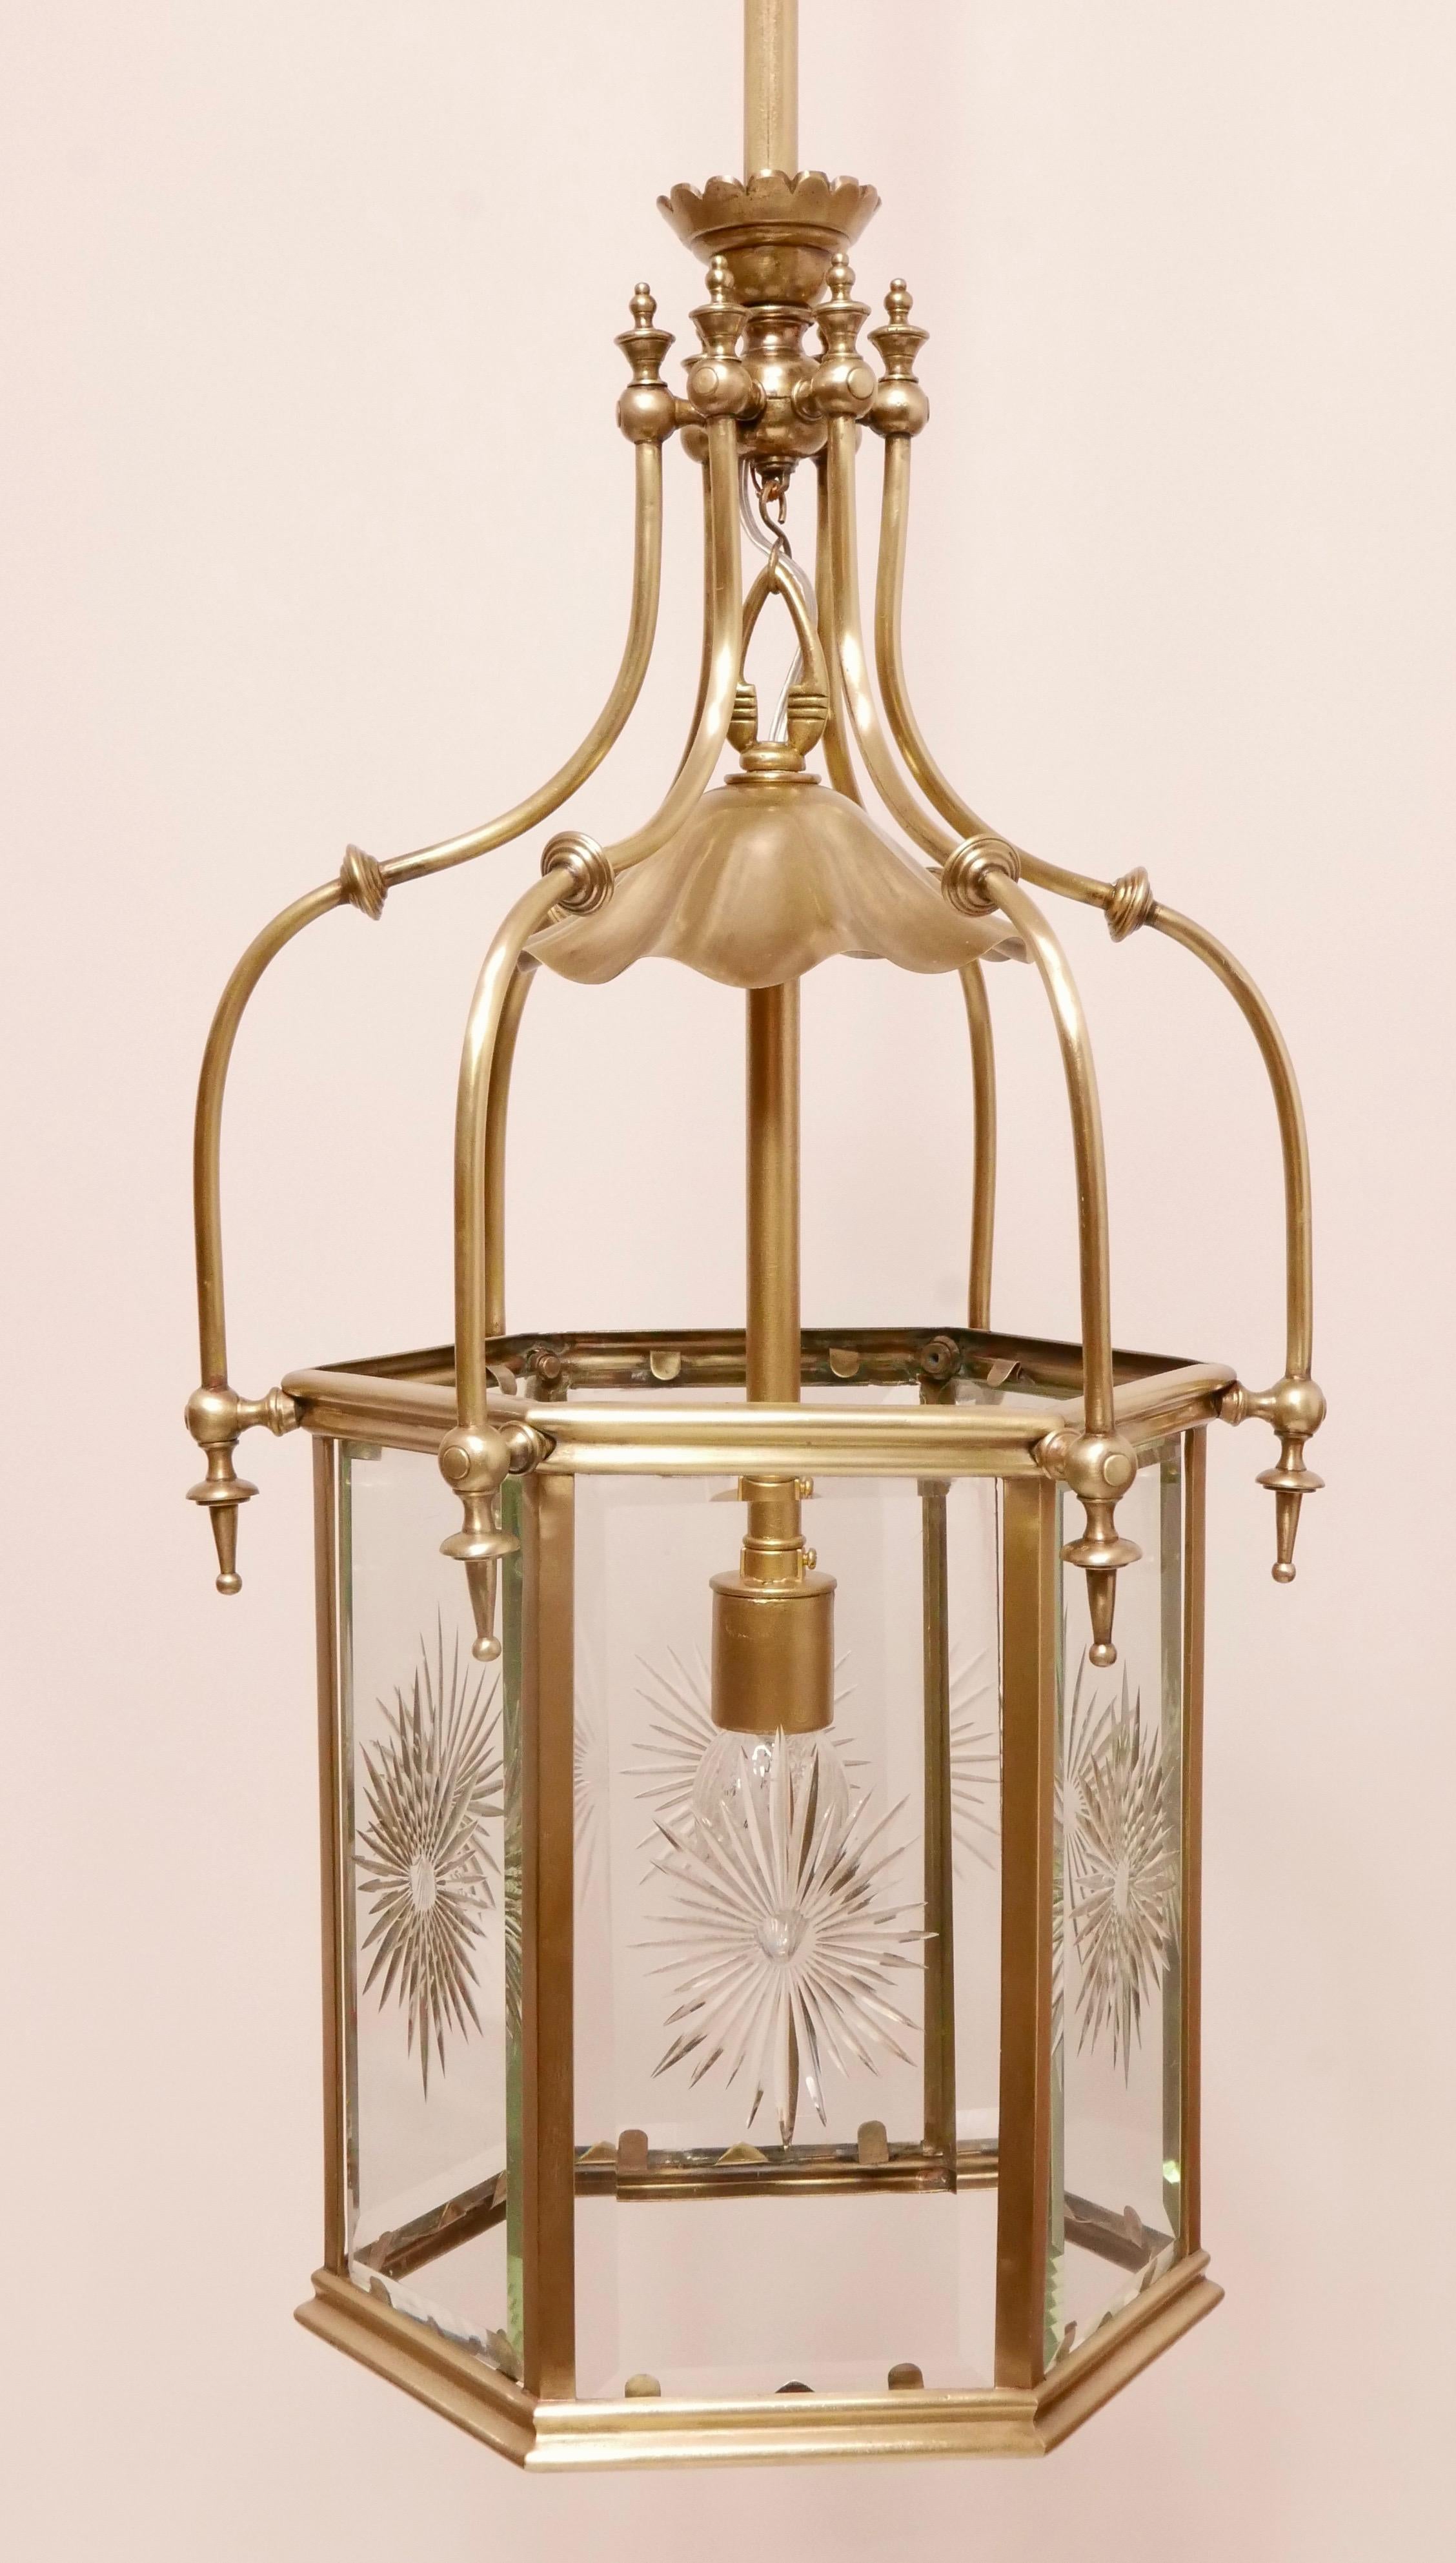 Exceptional 19th Century Brass & Cut Glass Hexagon Shaped Entry or Hall Lantern For Sale 3